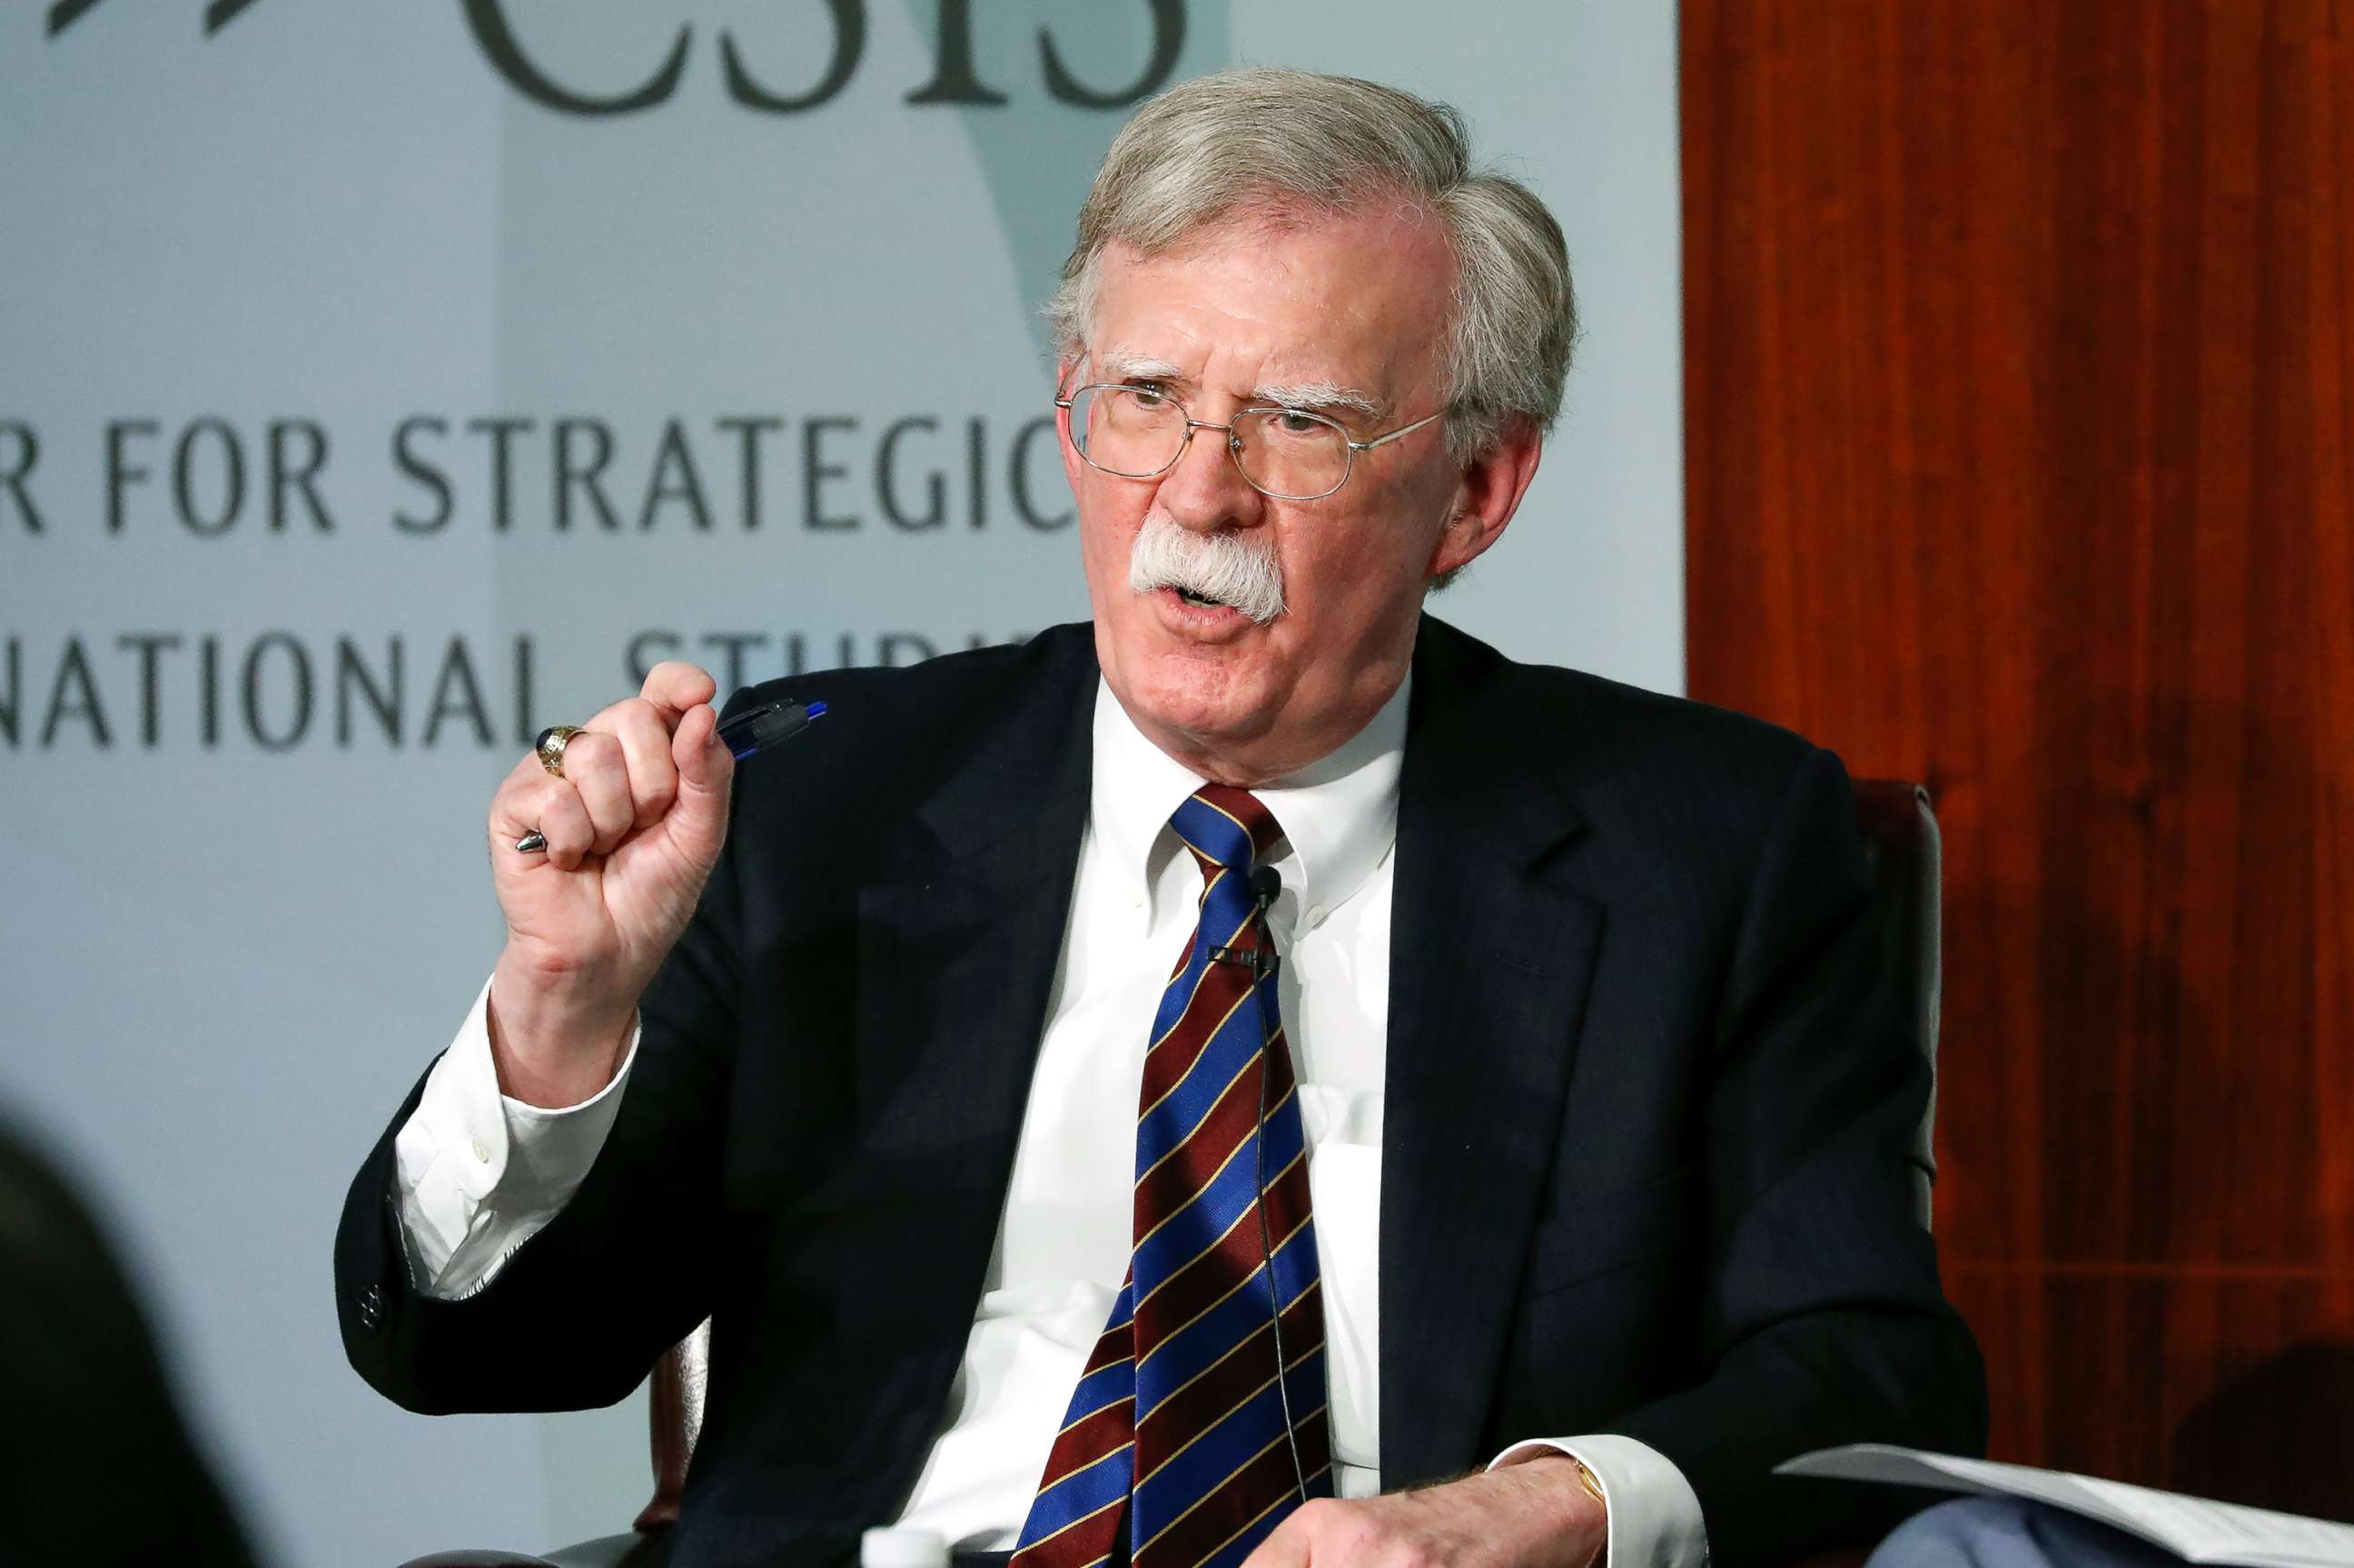 PHOTO: Former National security adviser John Bolton gestures while speakings at the Center for Strategic and International Studies in Washington D.C., Sept. 30, 2019. 